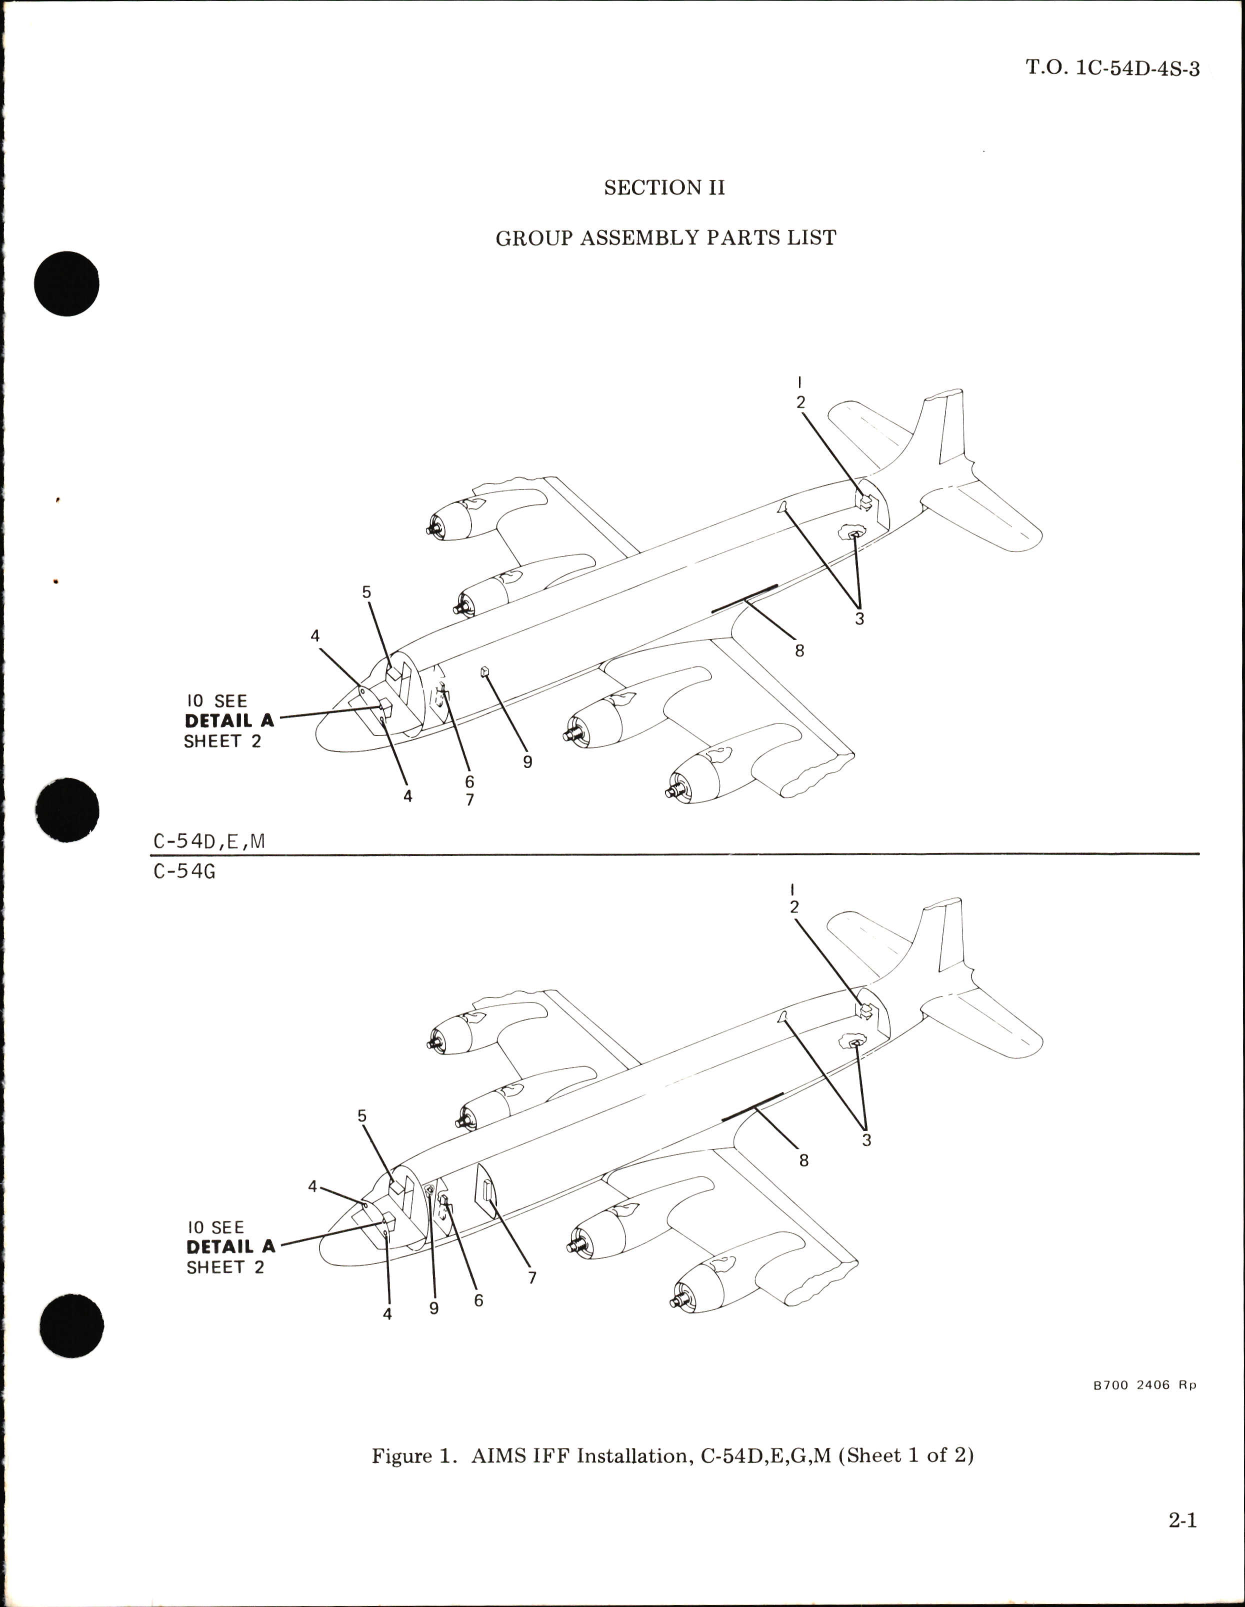 Sample page 5 from AirCorps Library document: Operational Supplement, Illustrated Parts Breakdown for C-54D, C-54E, C-54G, and C-54M